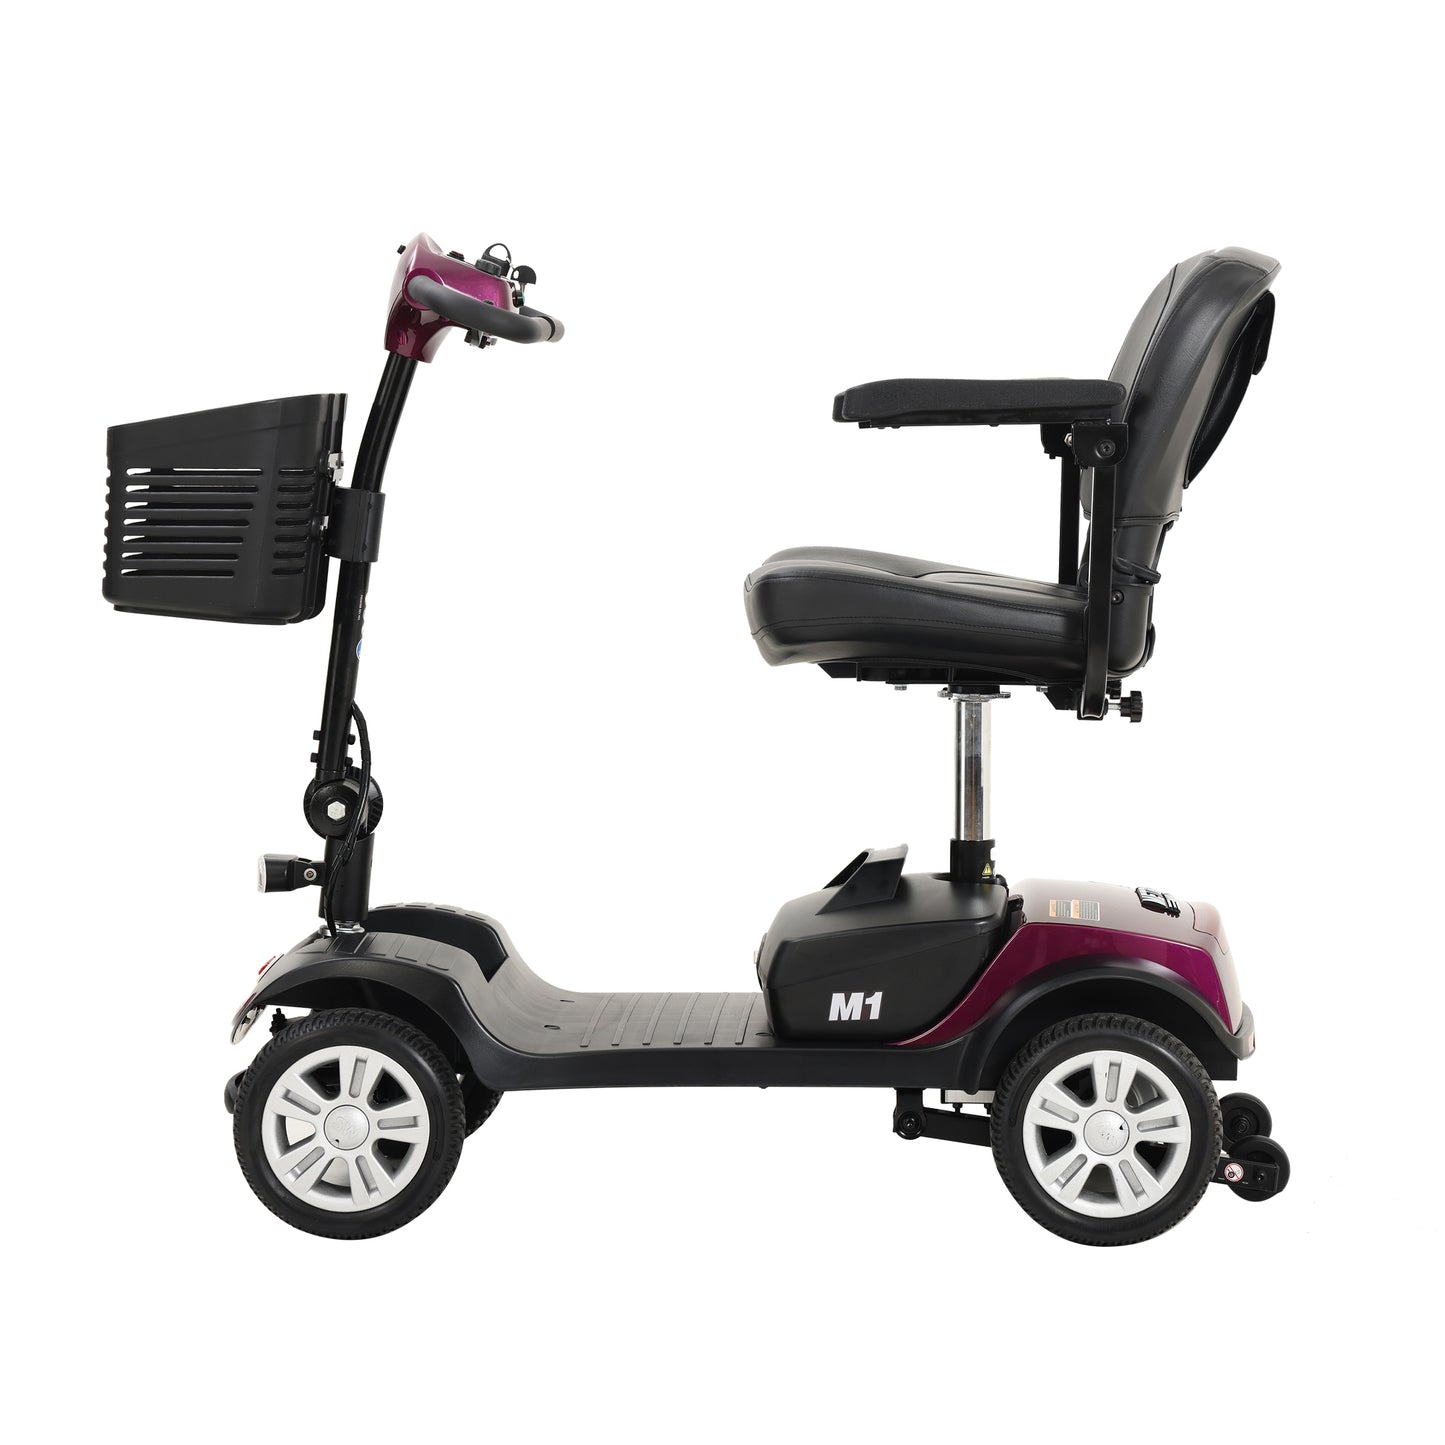 Metro M1 Mobility Scooter - Plum